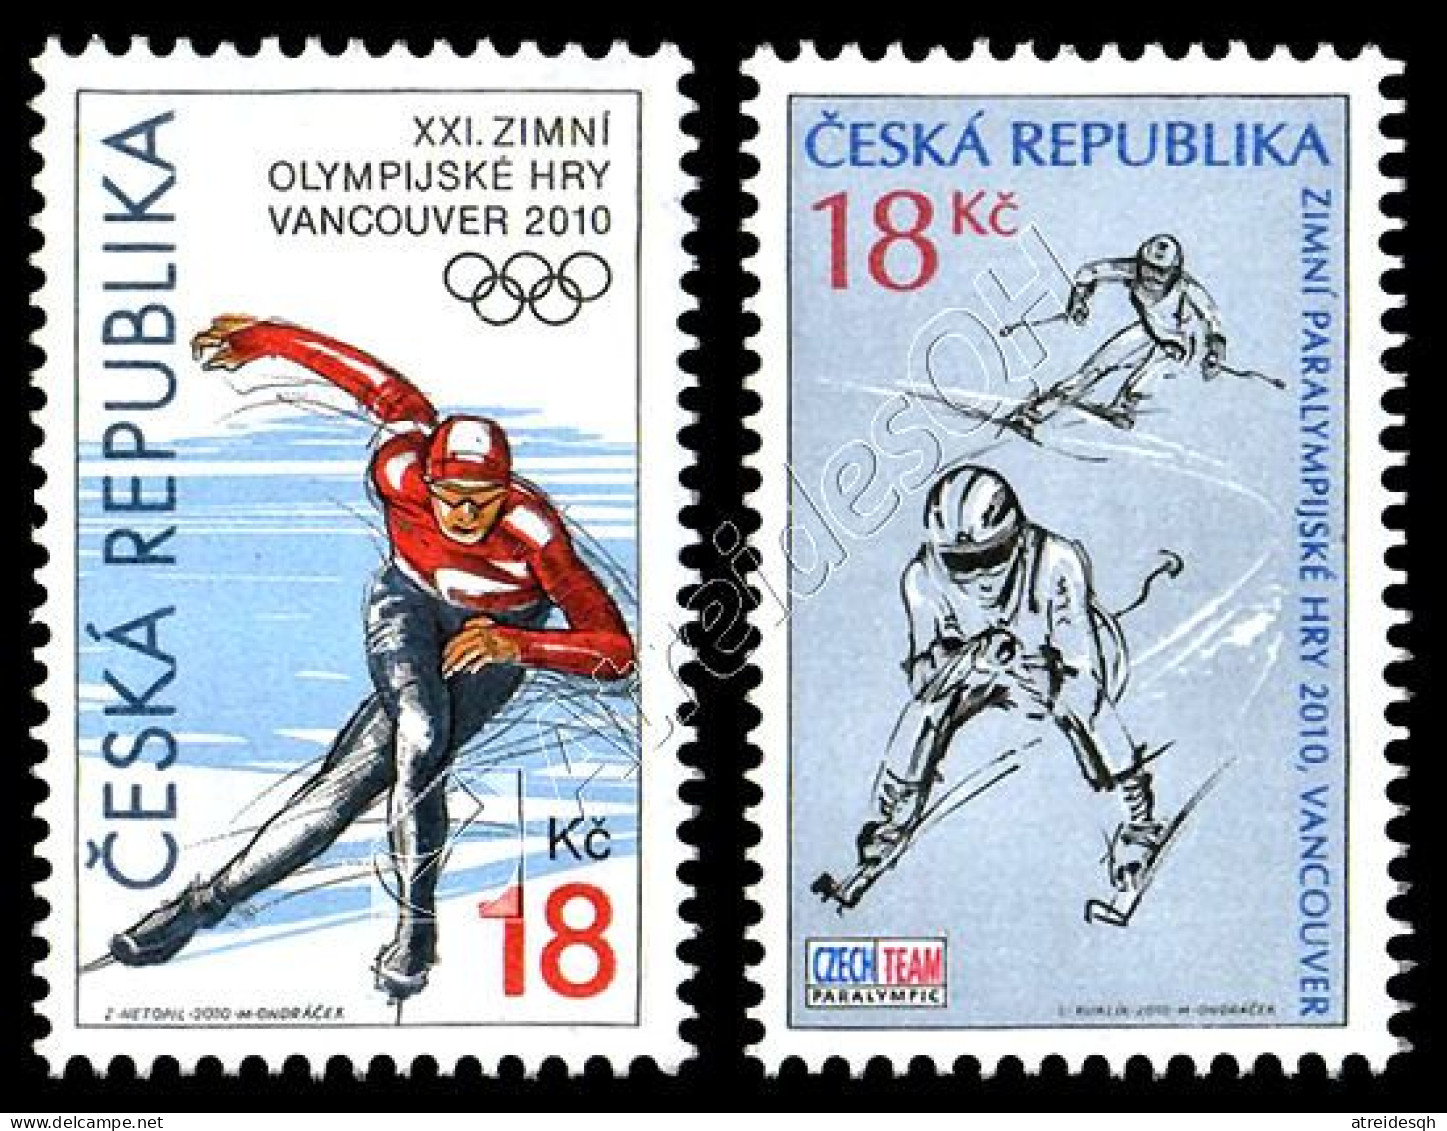 [Q] Rep. Ceca / Czech Rep. 2010: Olimpiadi Invernali Vancouver 2010 / Vancouver 2010 Winter Olympic Games ** - Inverno2010: Vancouver